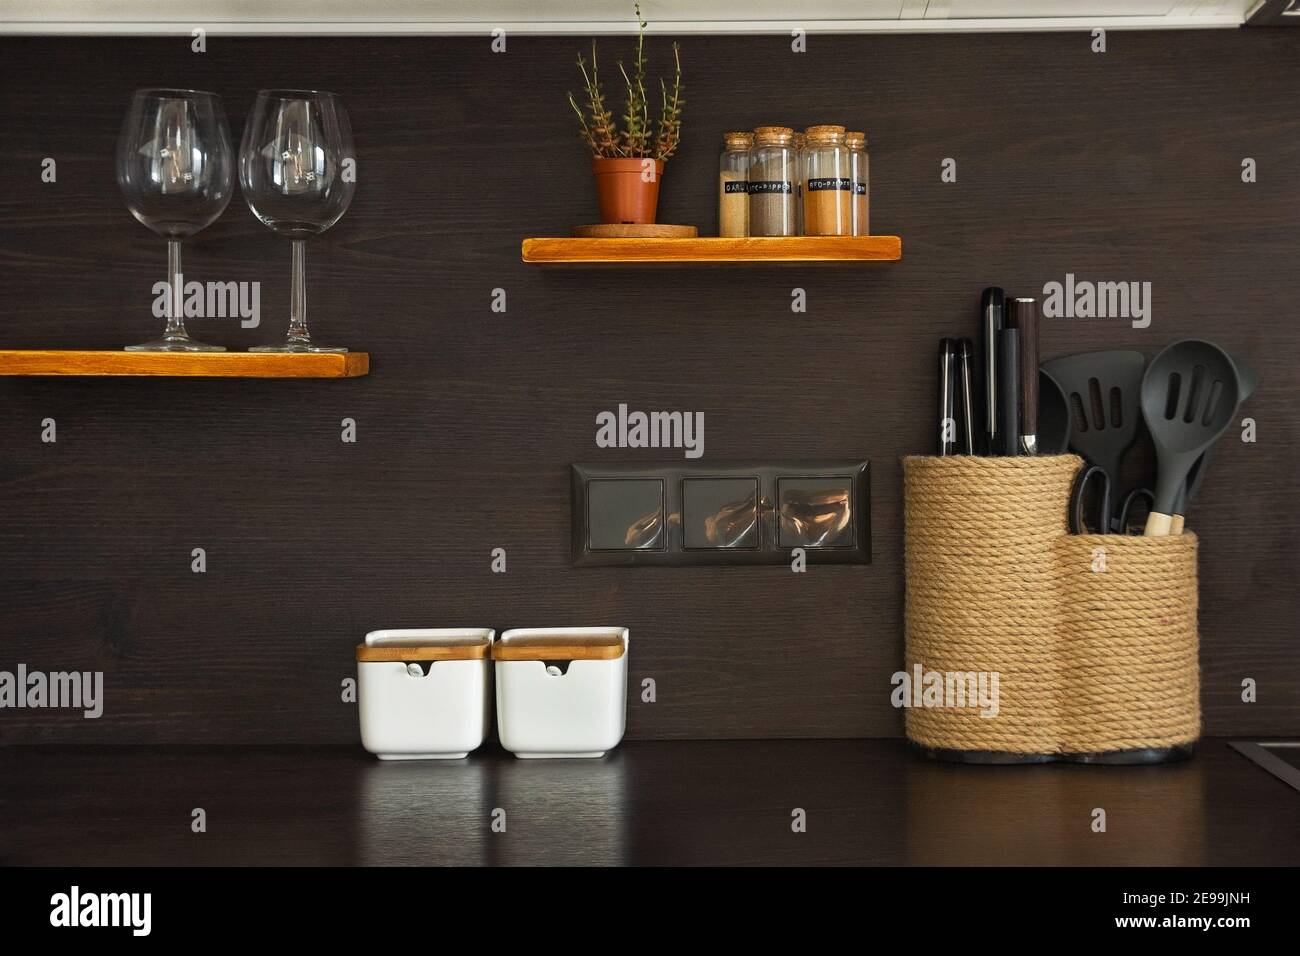 Kitchen utensils, decor, jars with spice, knives. glasses and plant in a modern scandinavian style interior. Kitchen objects on the shelf and table Stock Photo